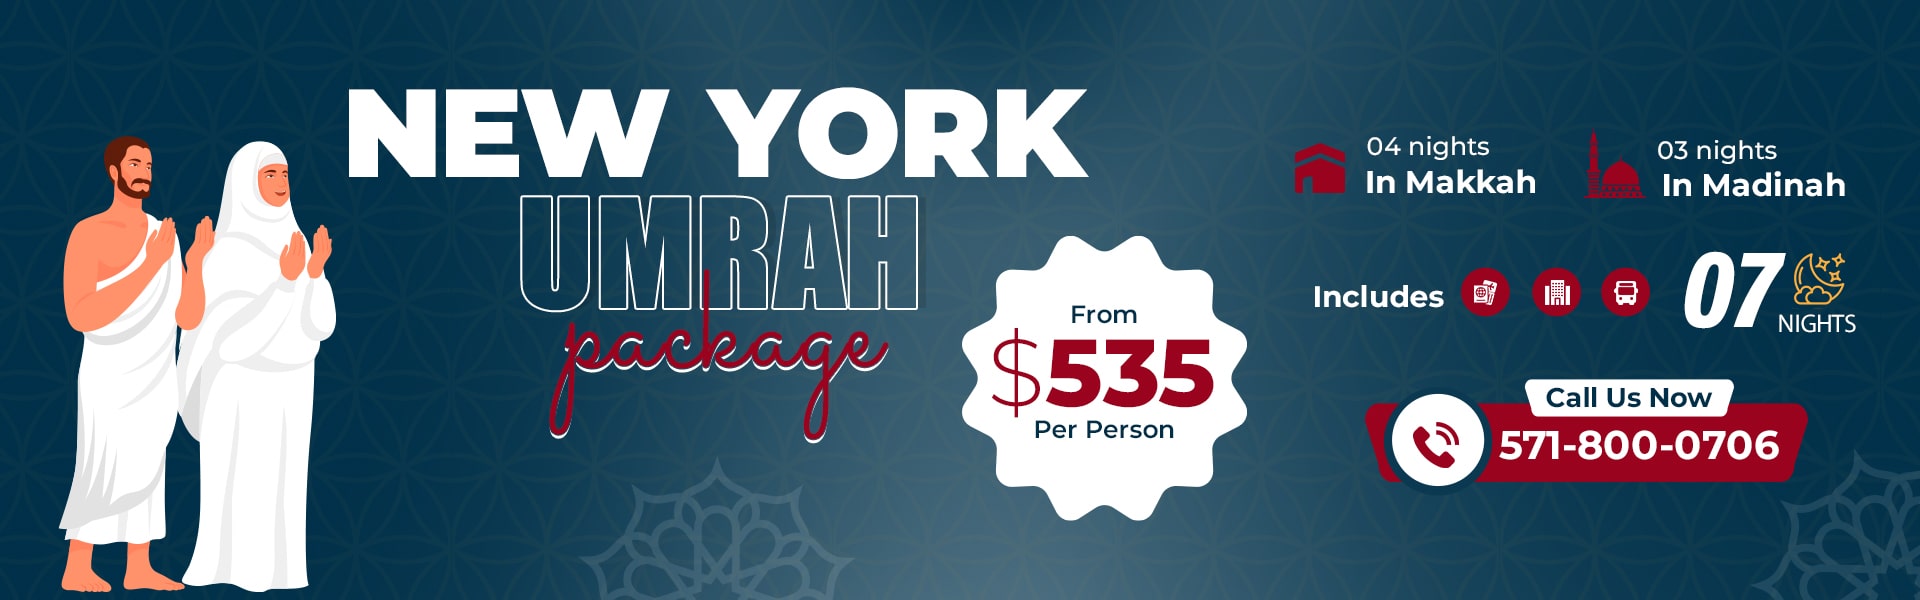 new-york-umrah-packages